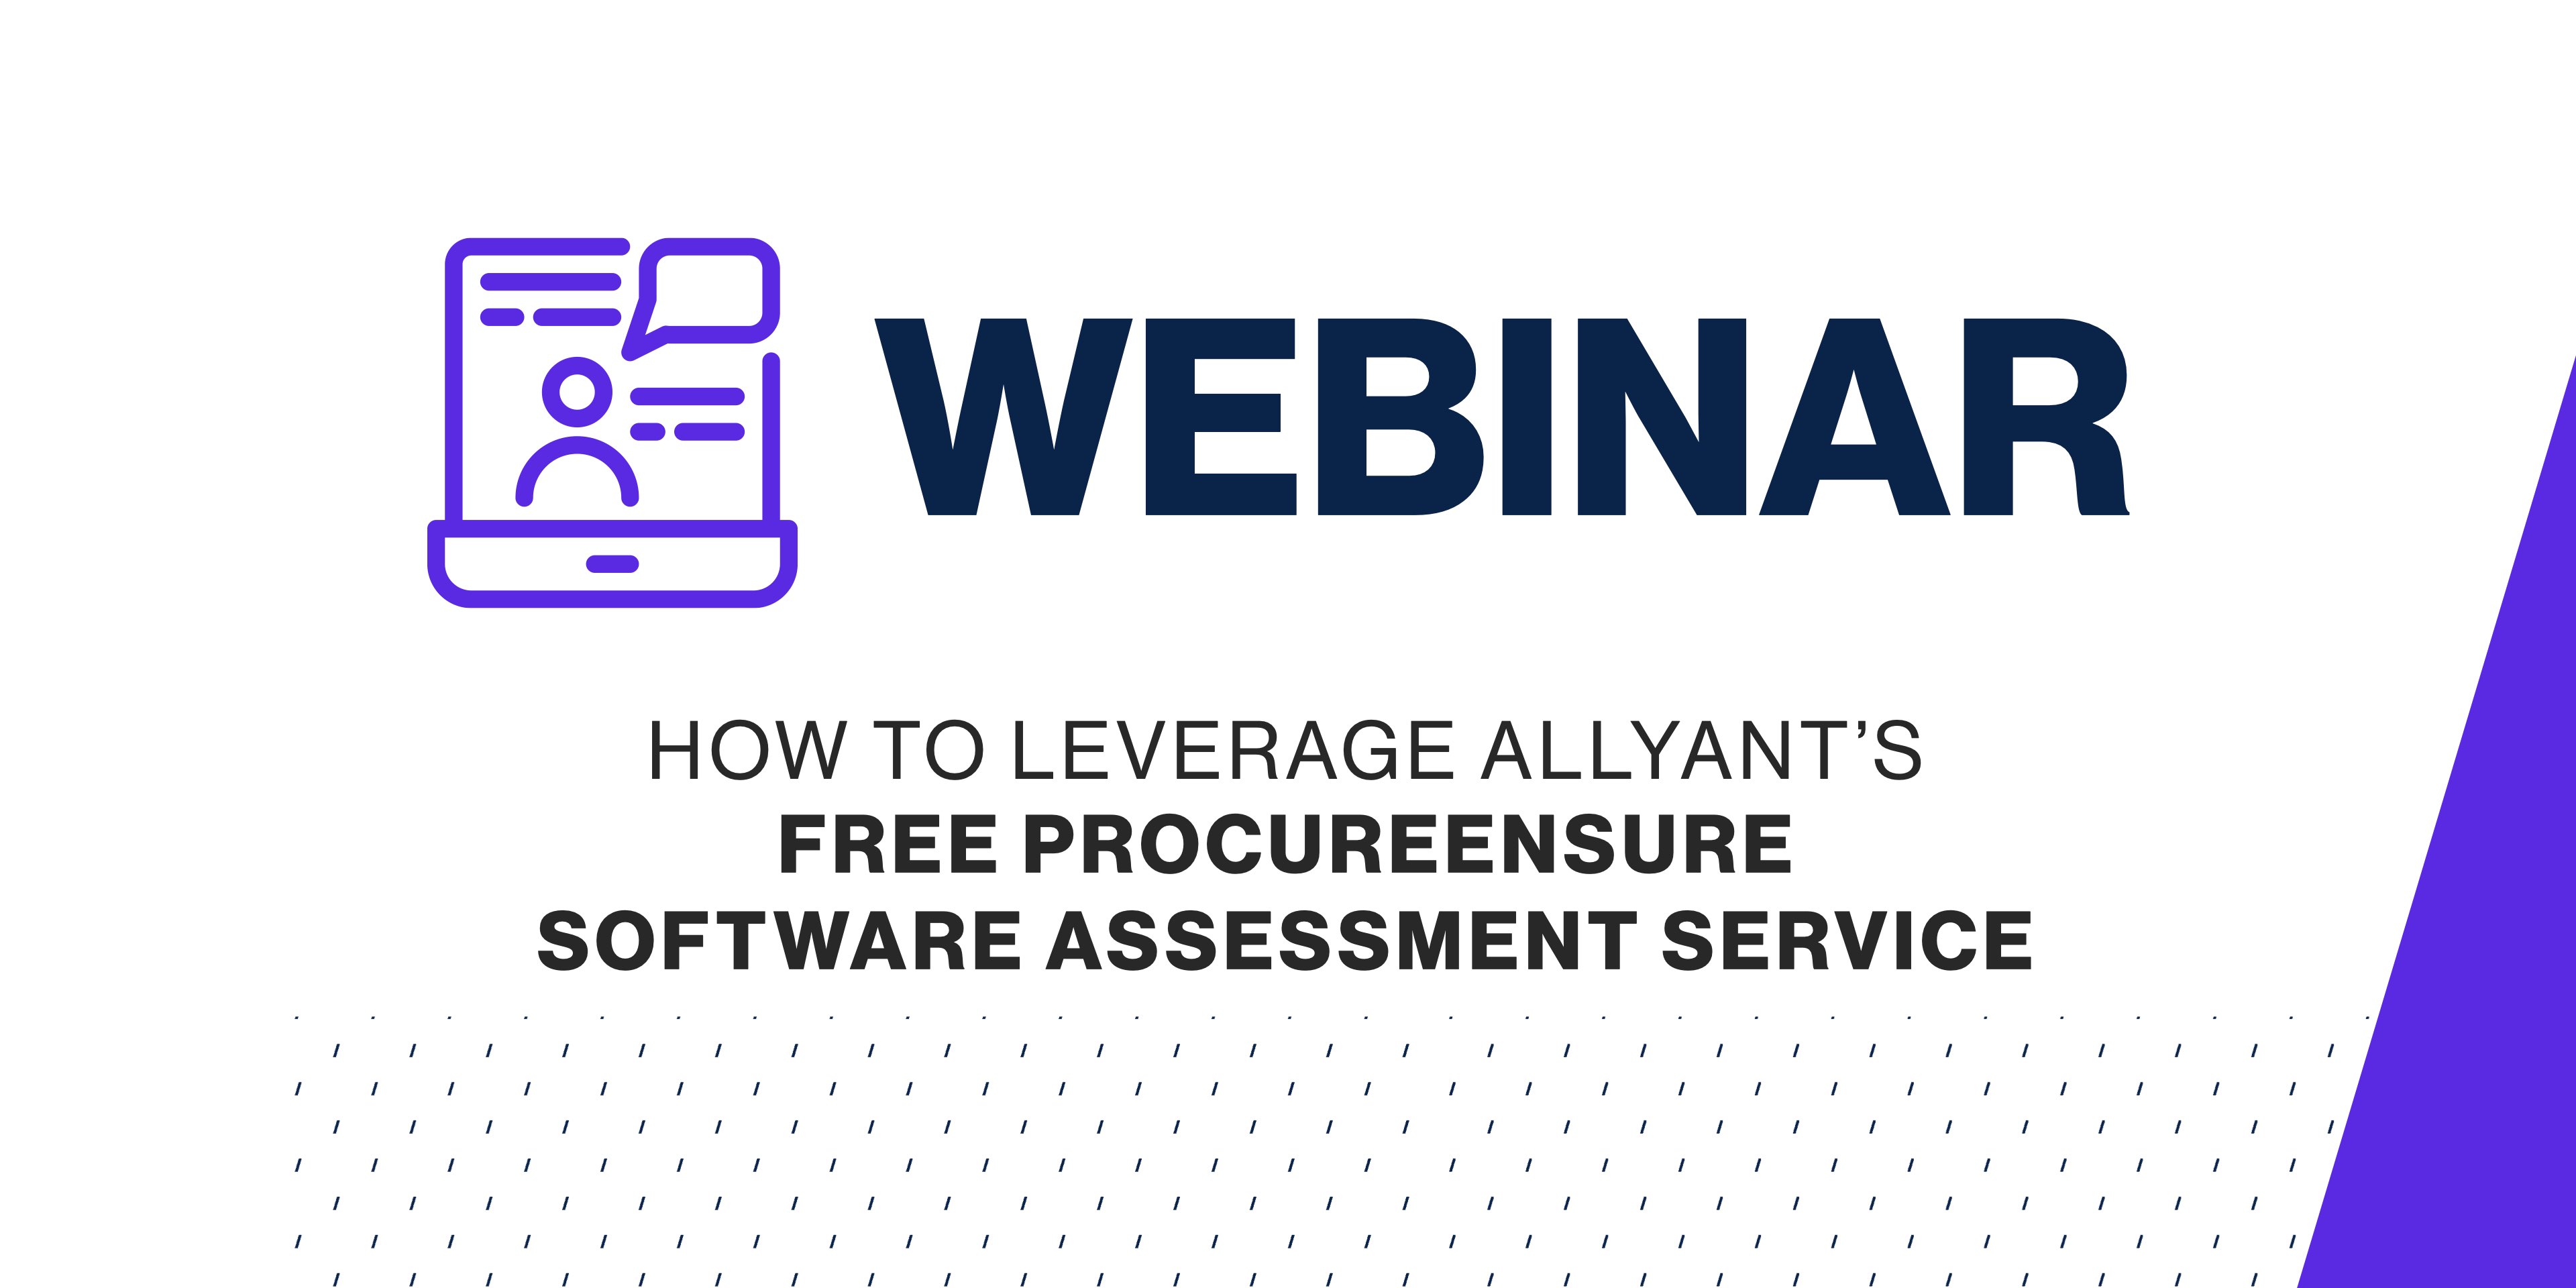 How to Leverage Allyant’s FREE ProcureEnsure Software Assessment Service